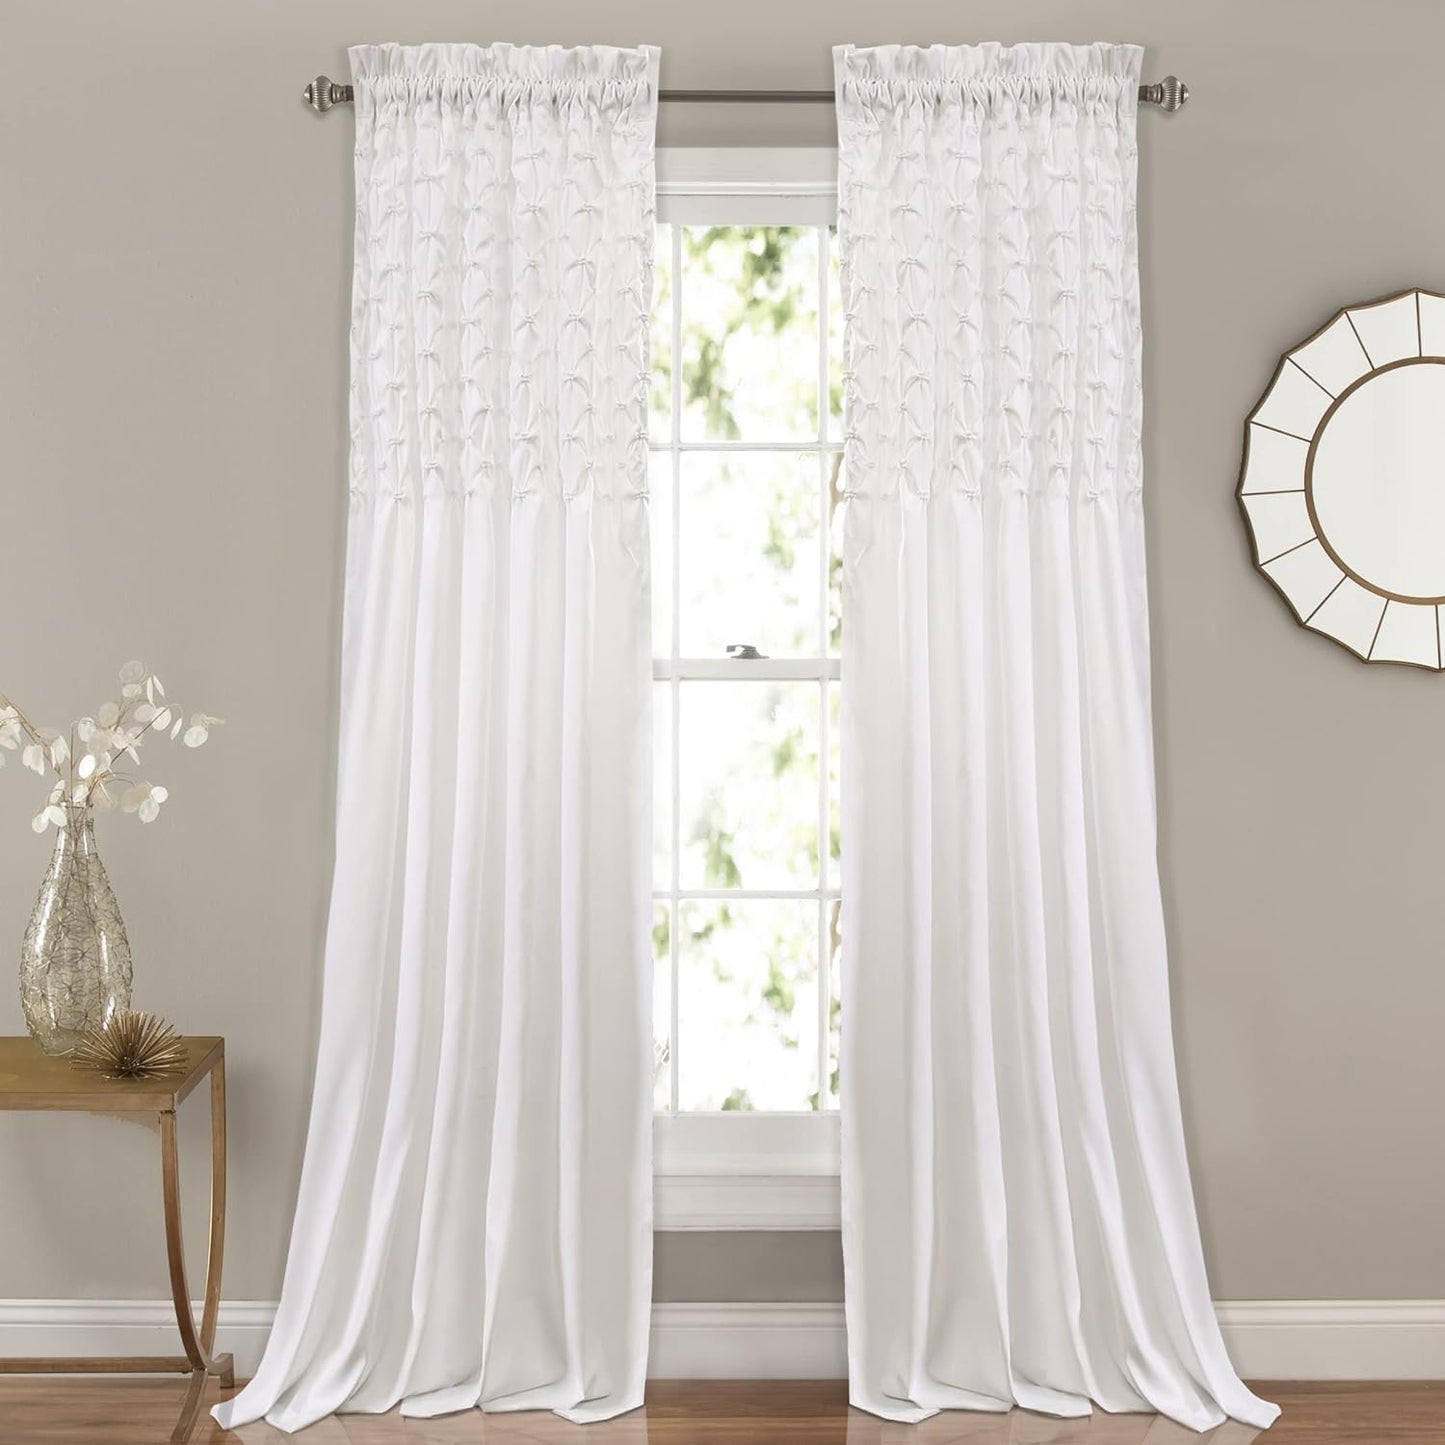 Lush Decor Bayview Curtains-Pintuck Textured Semi Sheer Window Panel Drapes Set for Living, Dining, Bedroom (Pair), 54" W X 84" L, White  Triangle Home Fashions White 54"W X 108"L 